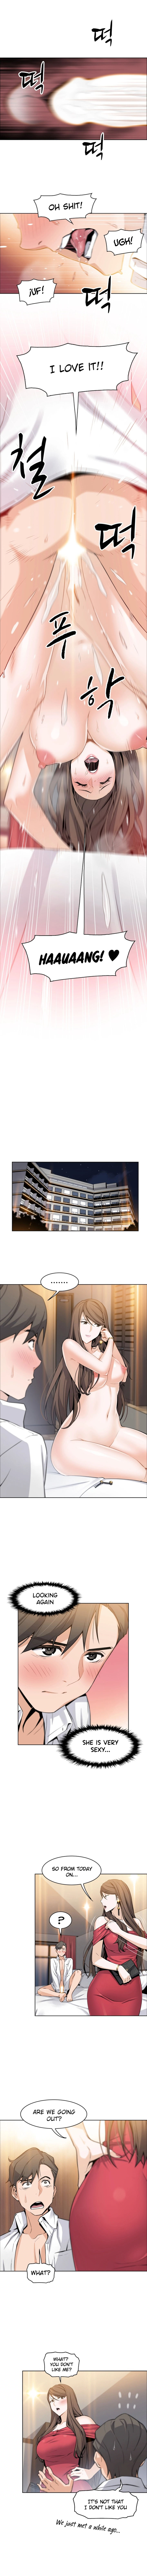 Housekeeper Manhwa - Chapter 7 Page 6